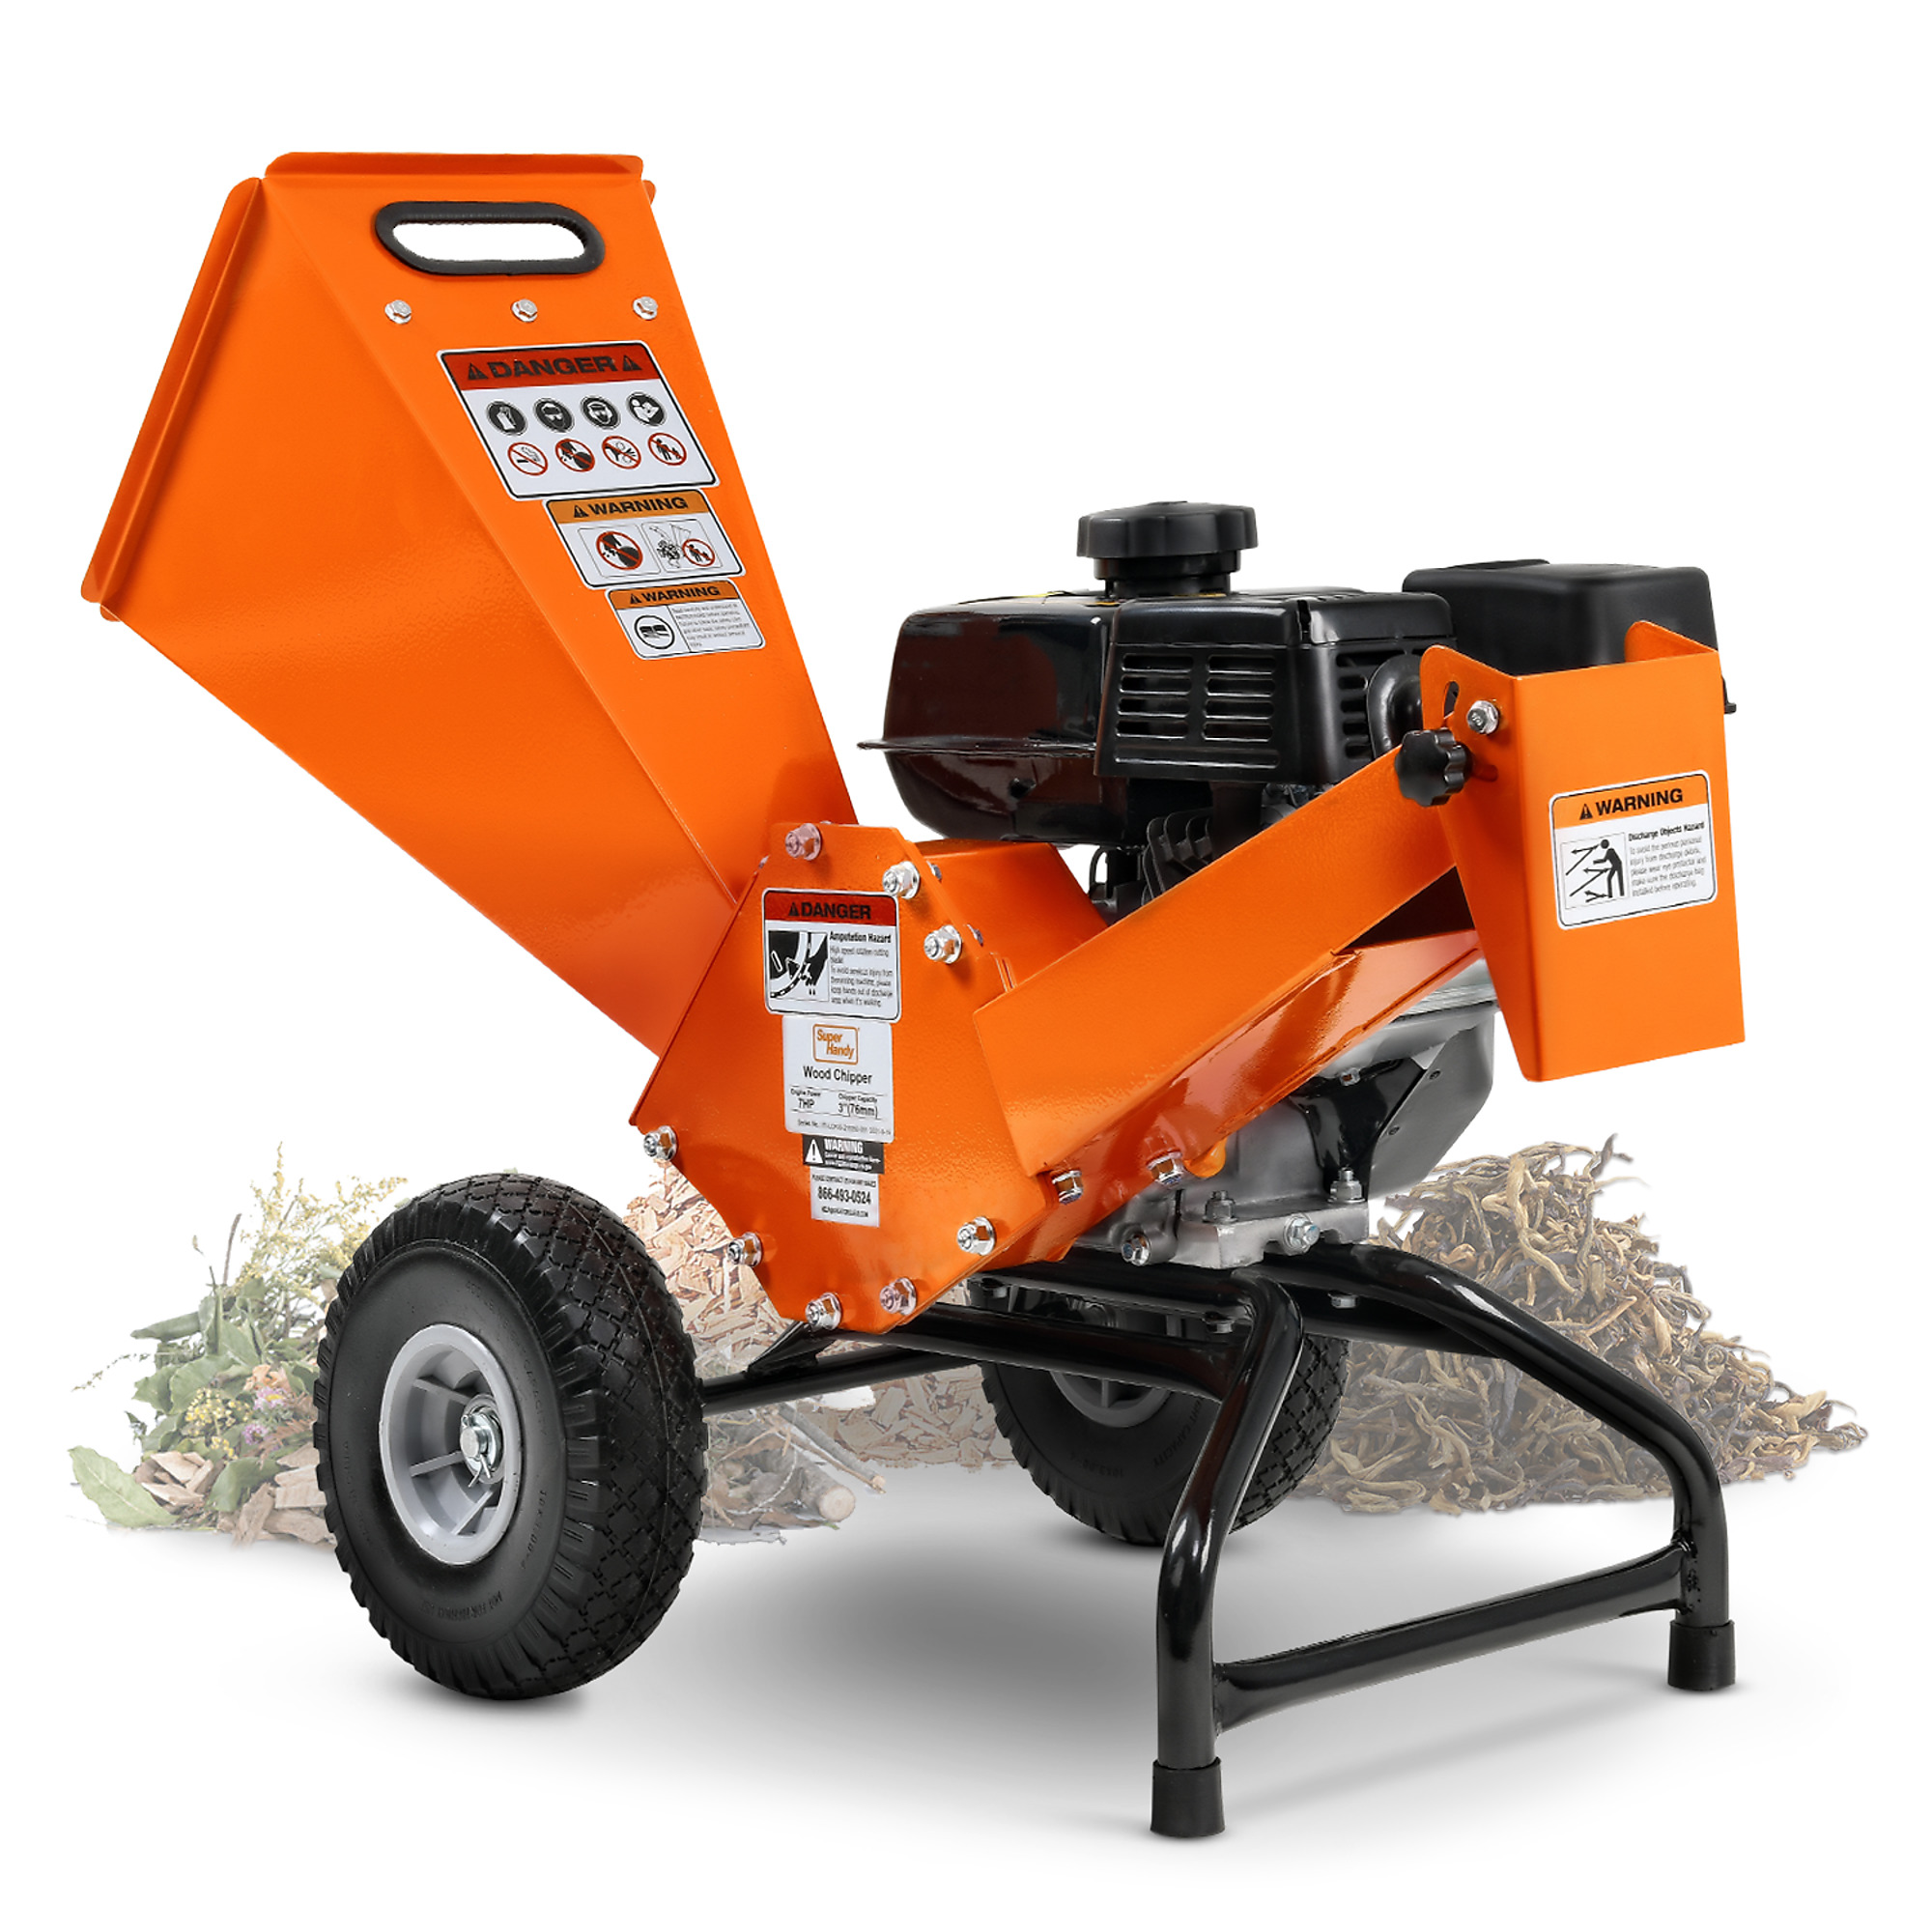 SuperHandy, Extra Larger Hopper Wood Chipper, Engine Displacement 209 cc, Horsepower 7 Max. Cutting Thickness 3 in, Model TRI-GUO074